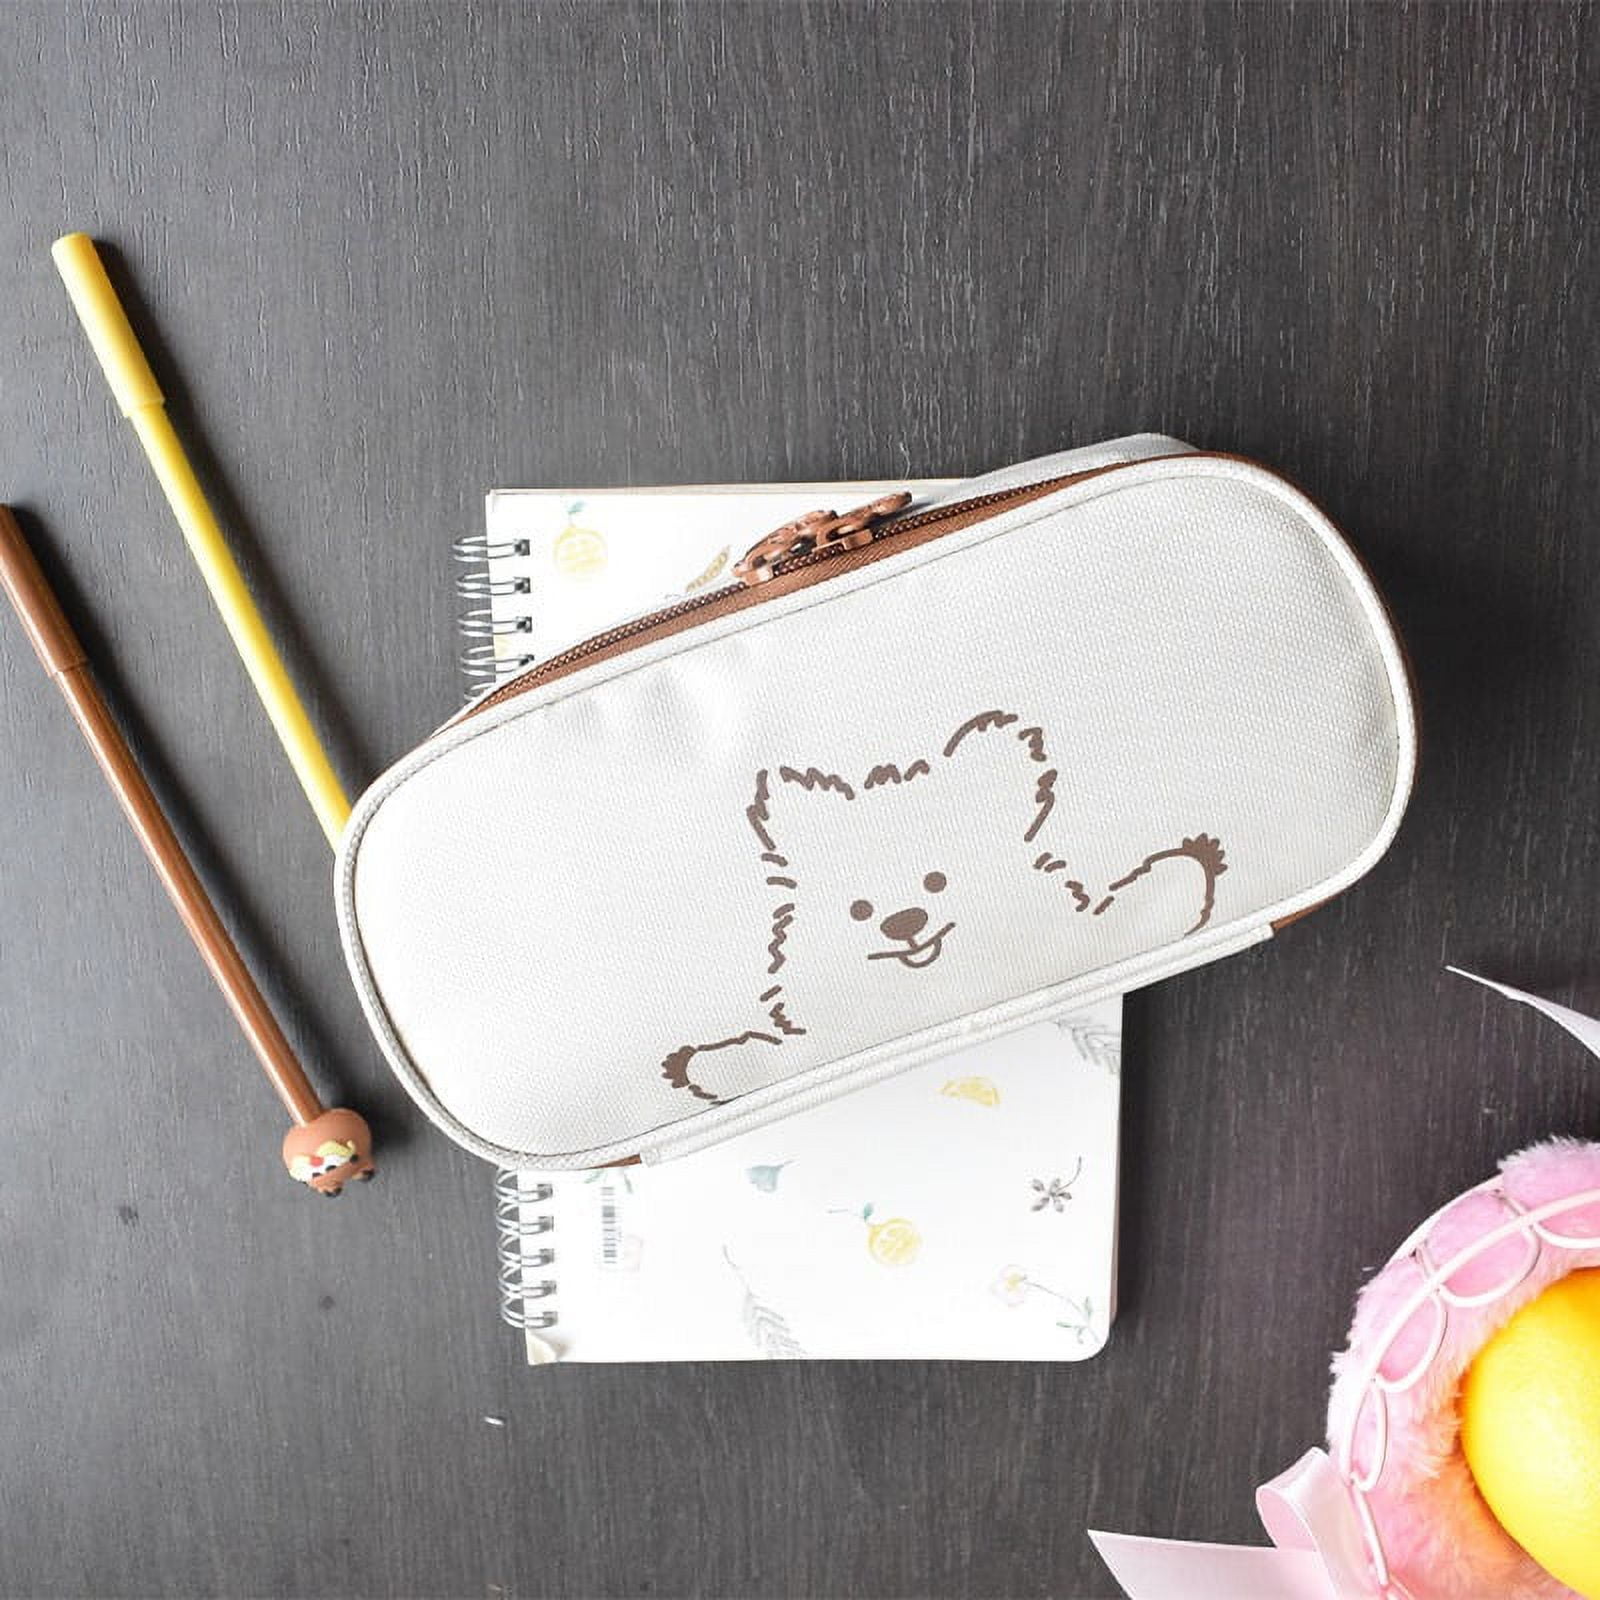  TOMPPY Cute Nurse Printed Pencil Case Leather Pencil Pouch  Portable Stationery Organizer Pencil Holder Makeup Bag With Zipper Closure  : Arts, Crafts & Sewing